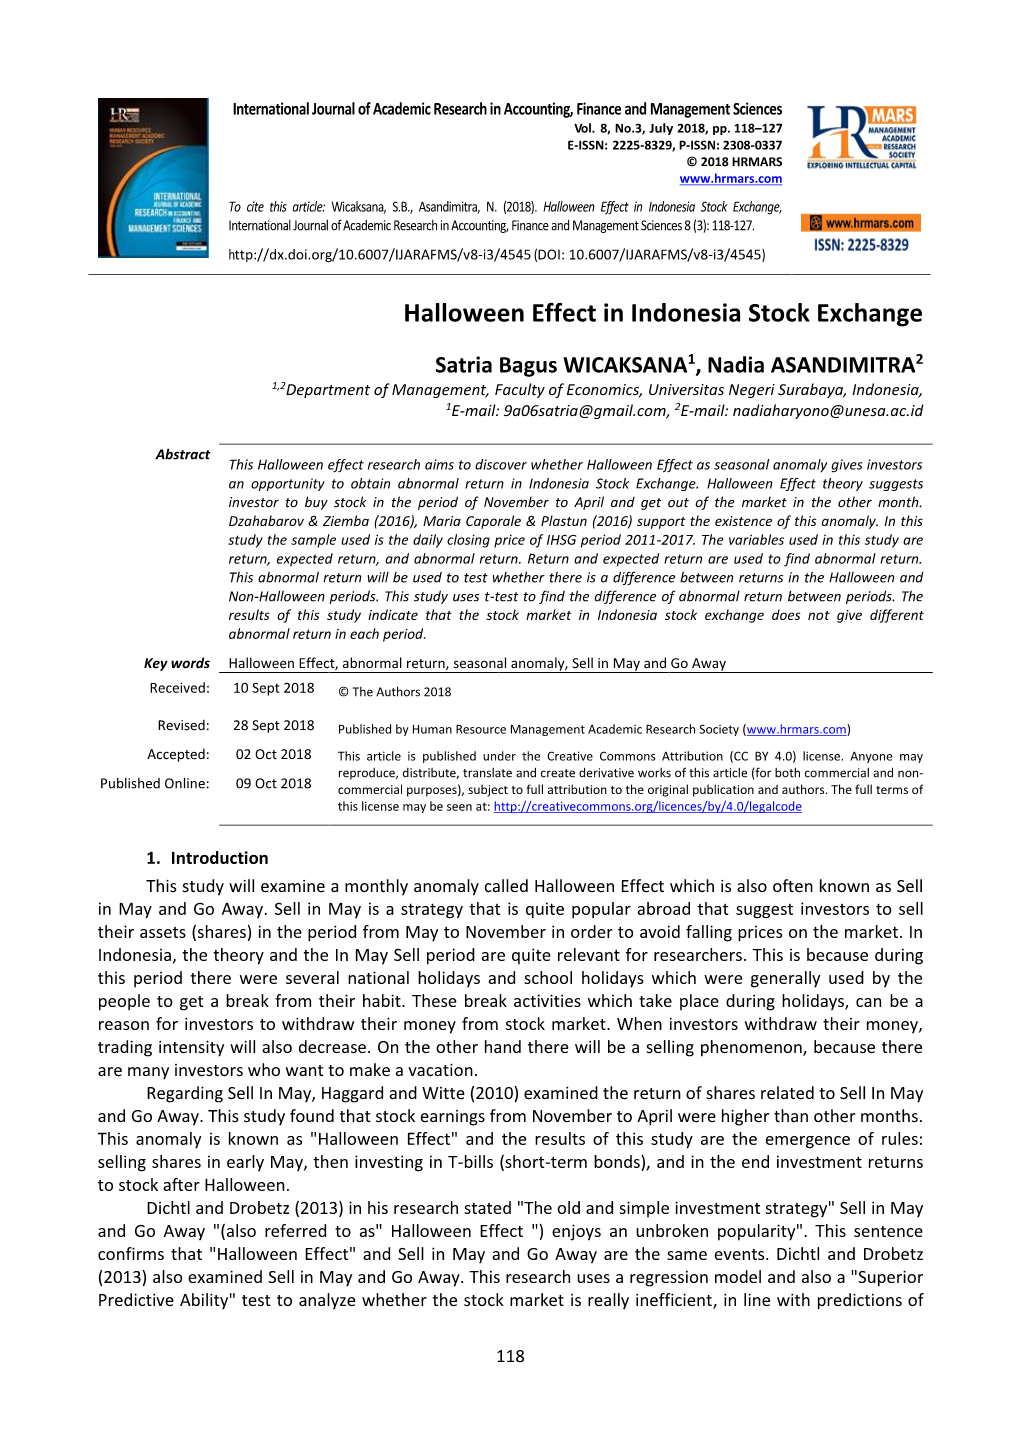 Halloween Effect in Indonesia Stock Exchange, International Journal of Academic Research in Accounting, Finance and Management Sciences 8 (3): 118-127